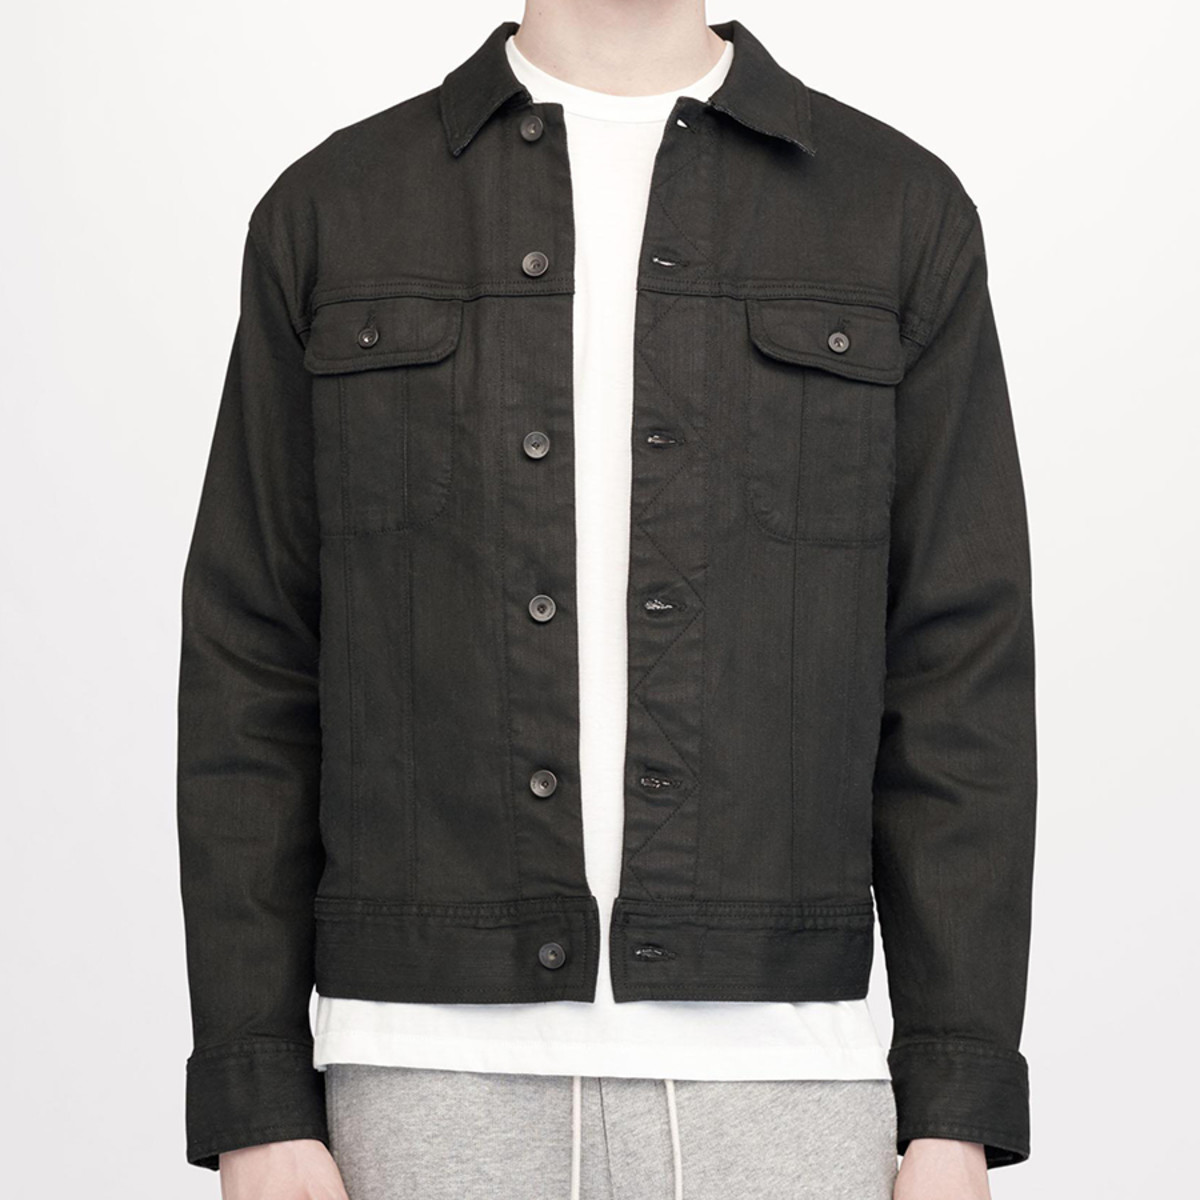 American-Made Denim Jackets From Levi's, Rag & Bone and More - Men's ...